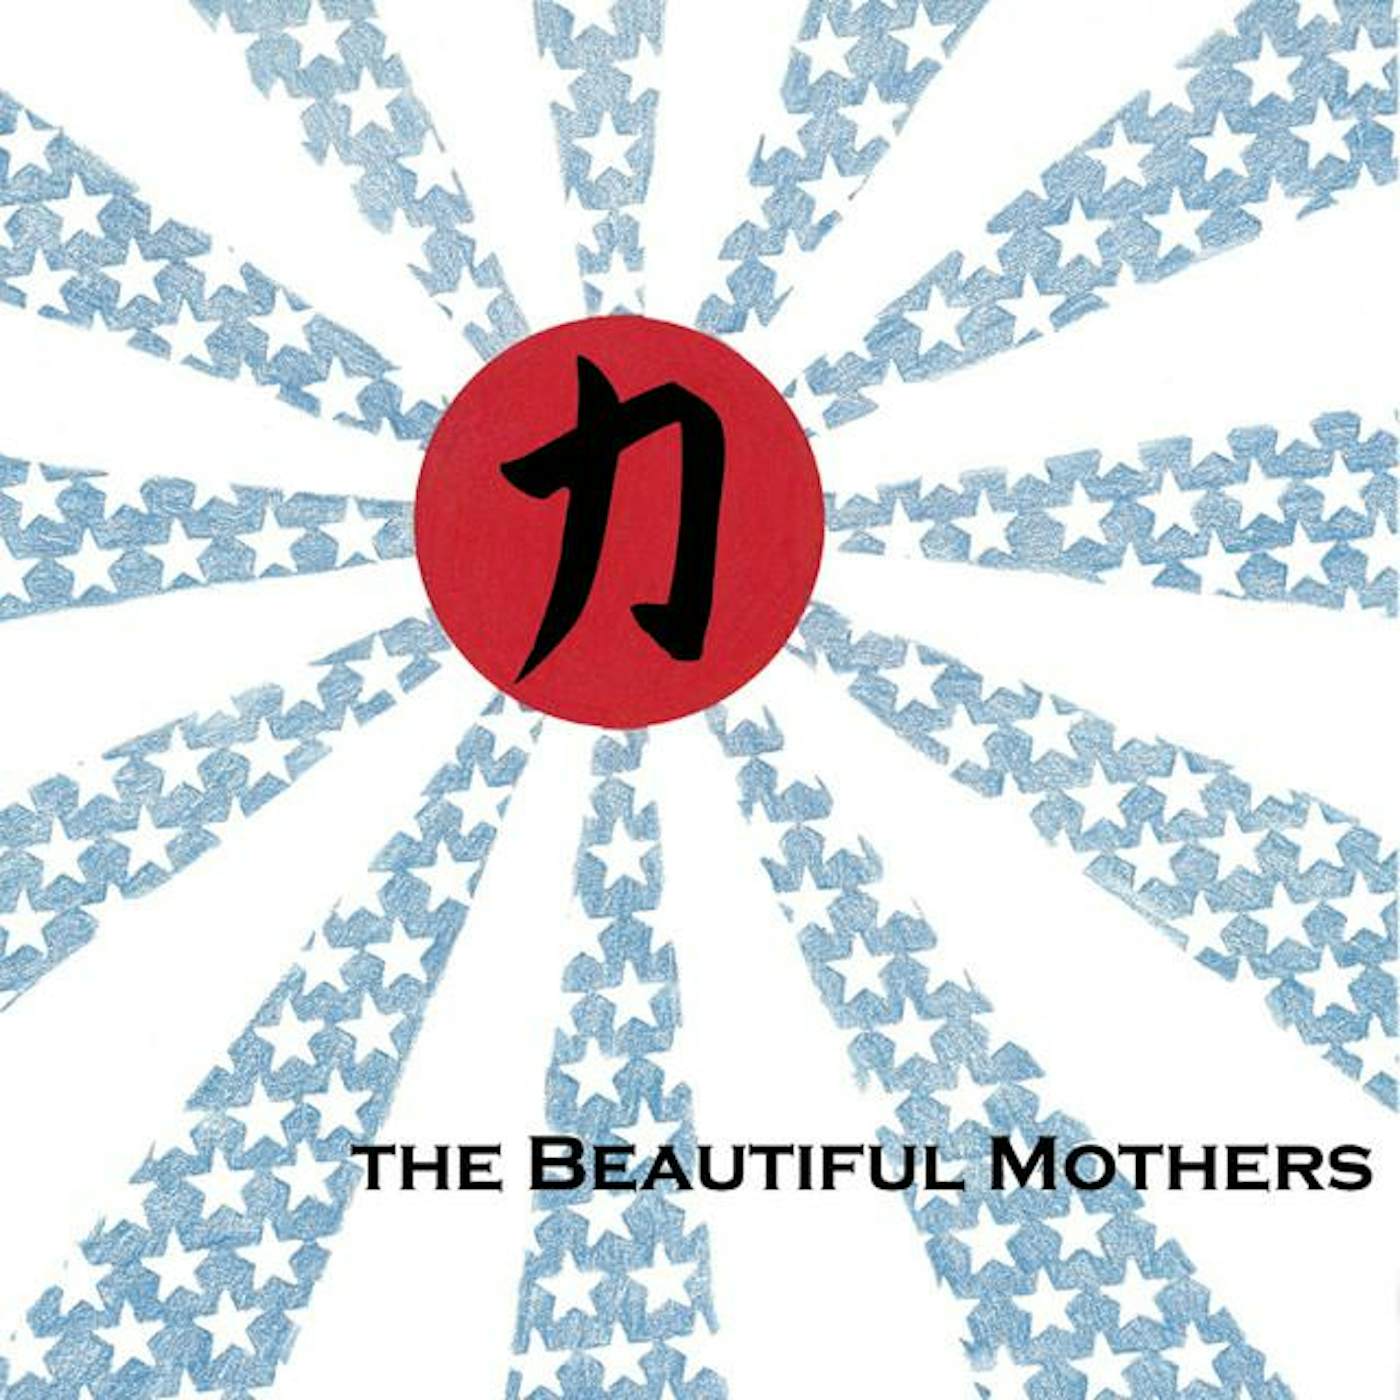 The Beautiful Mothers